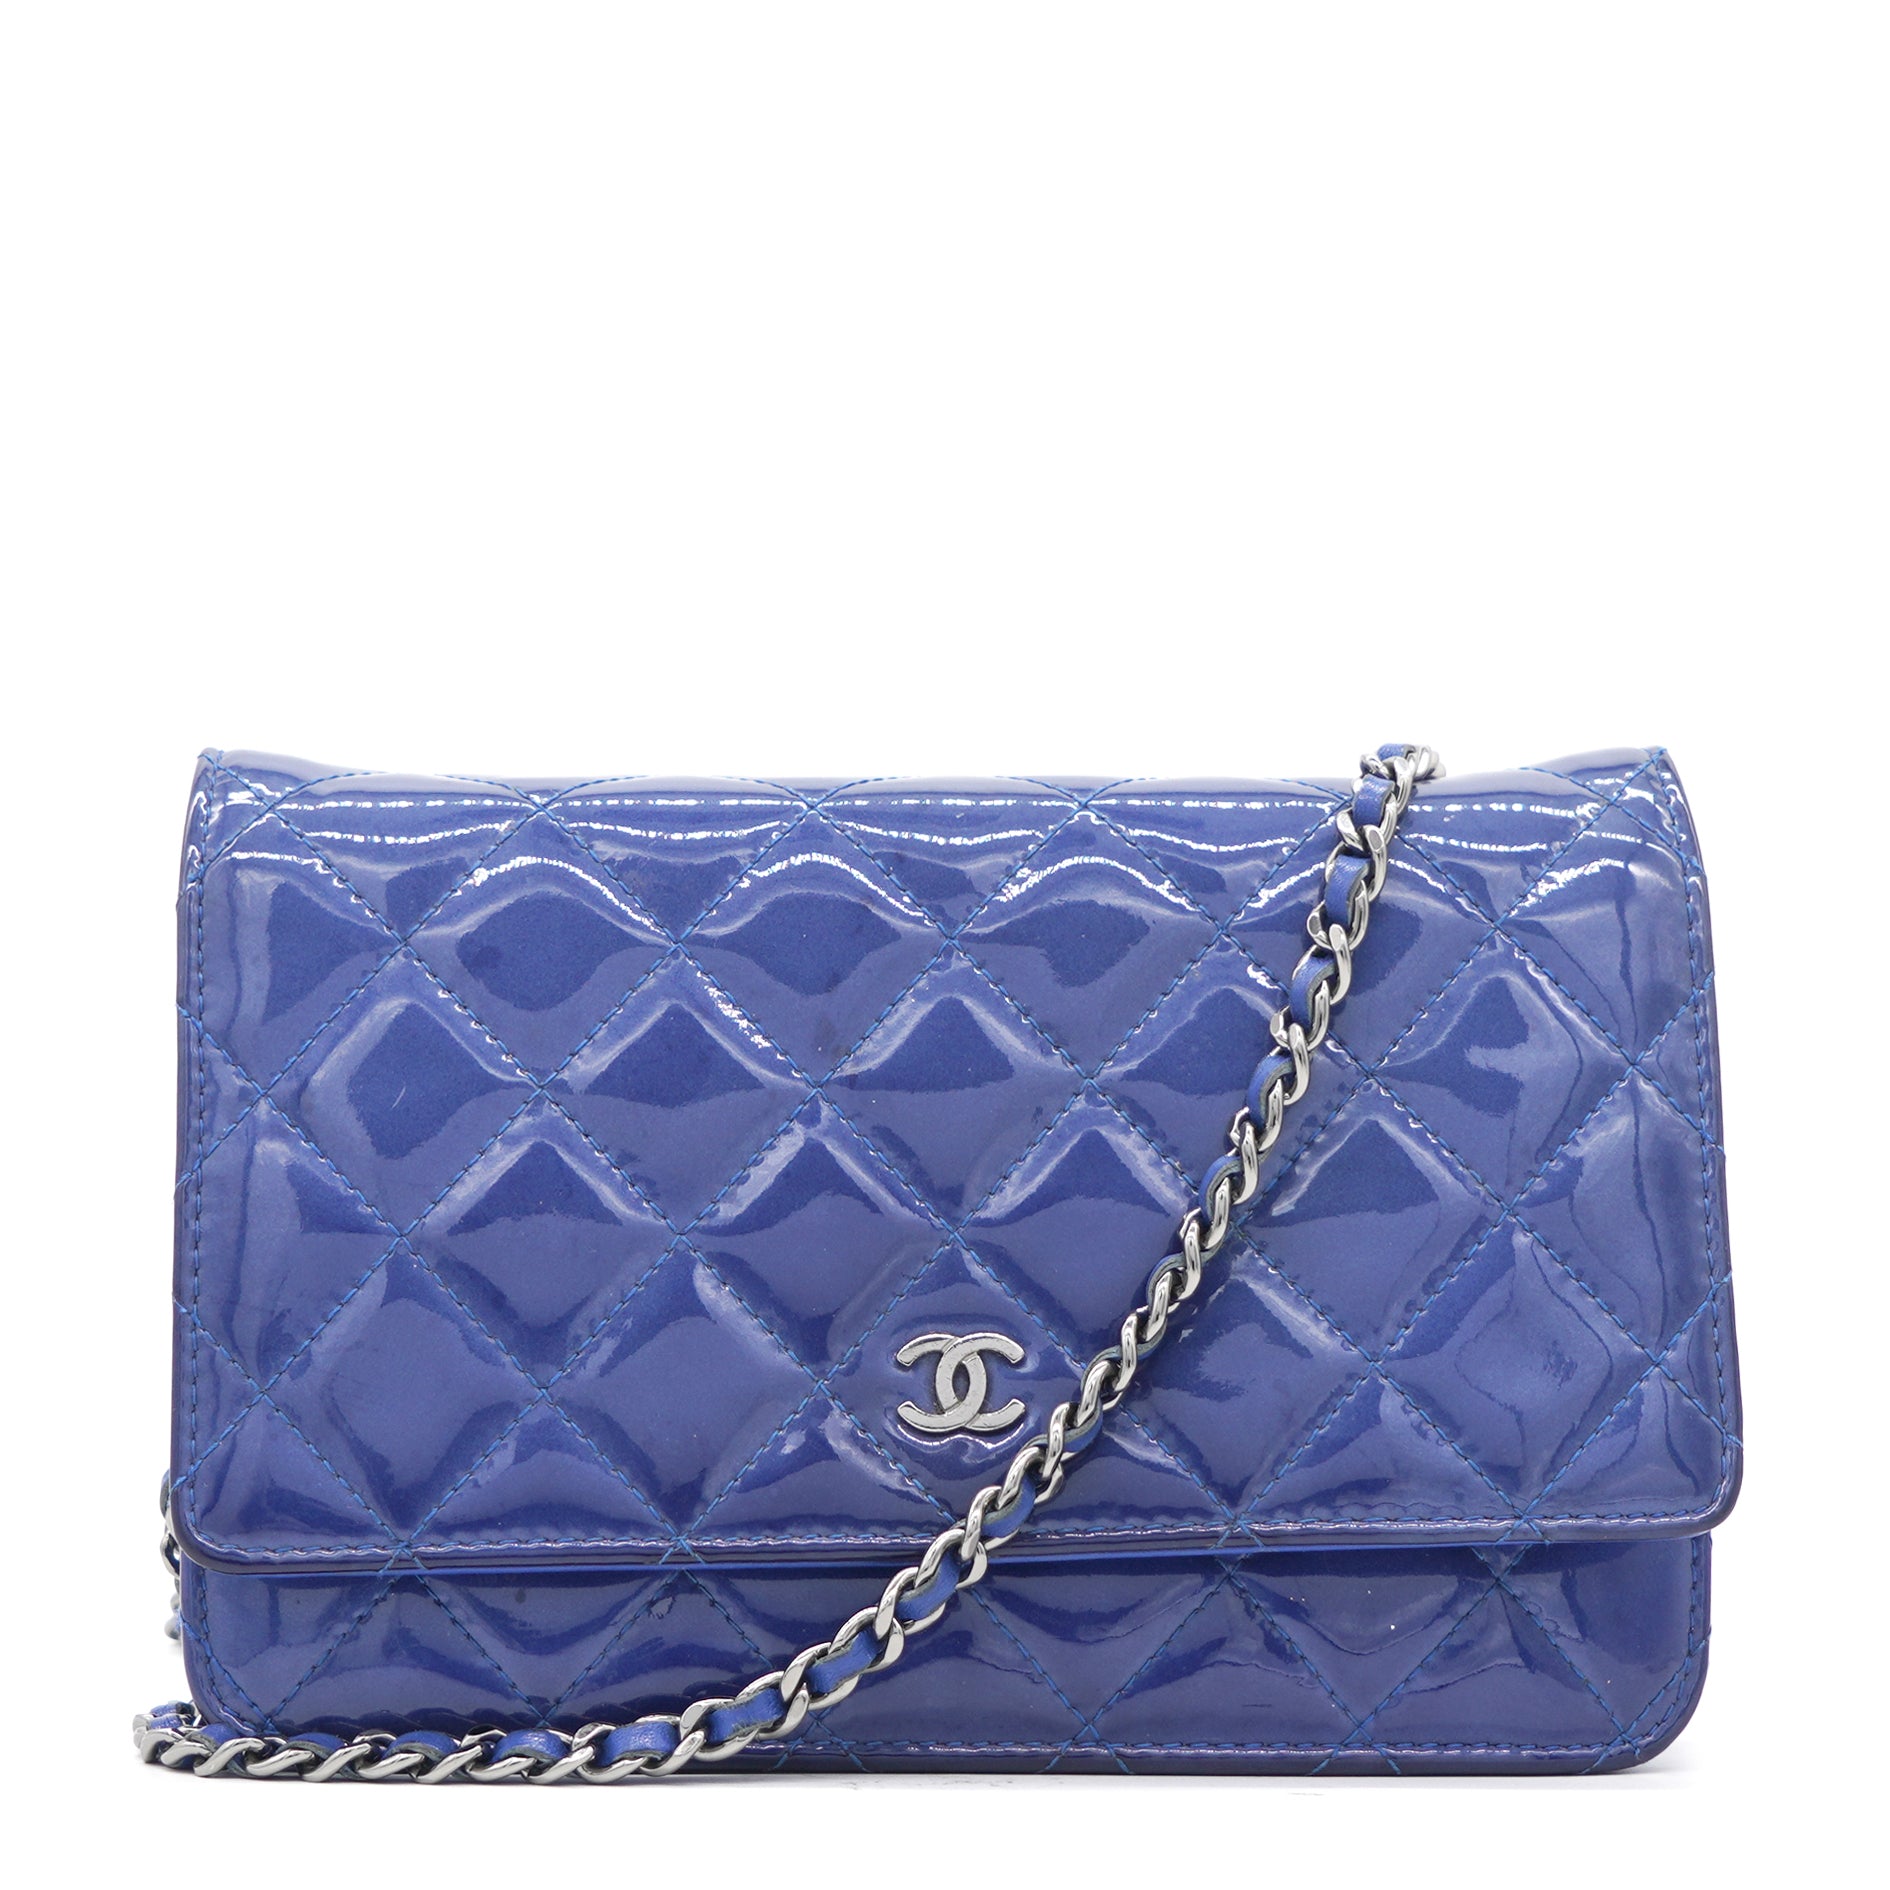 CHANEL CLASSIC FLAP VS TRENDY CC *Which one IS BETTER?*